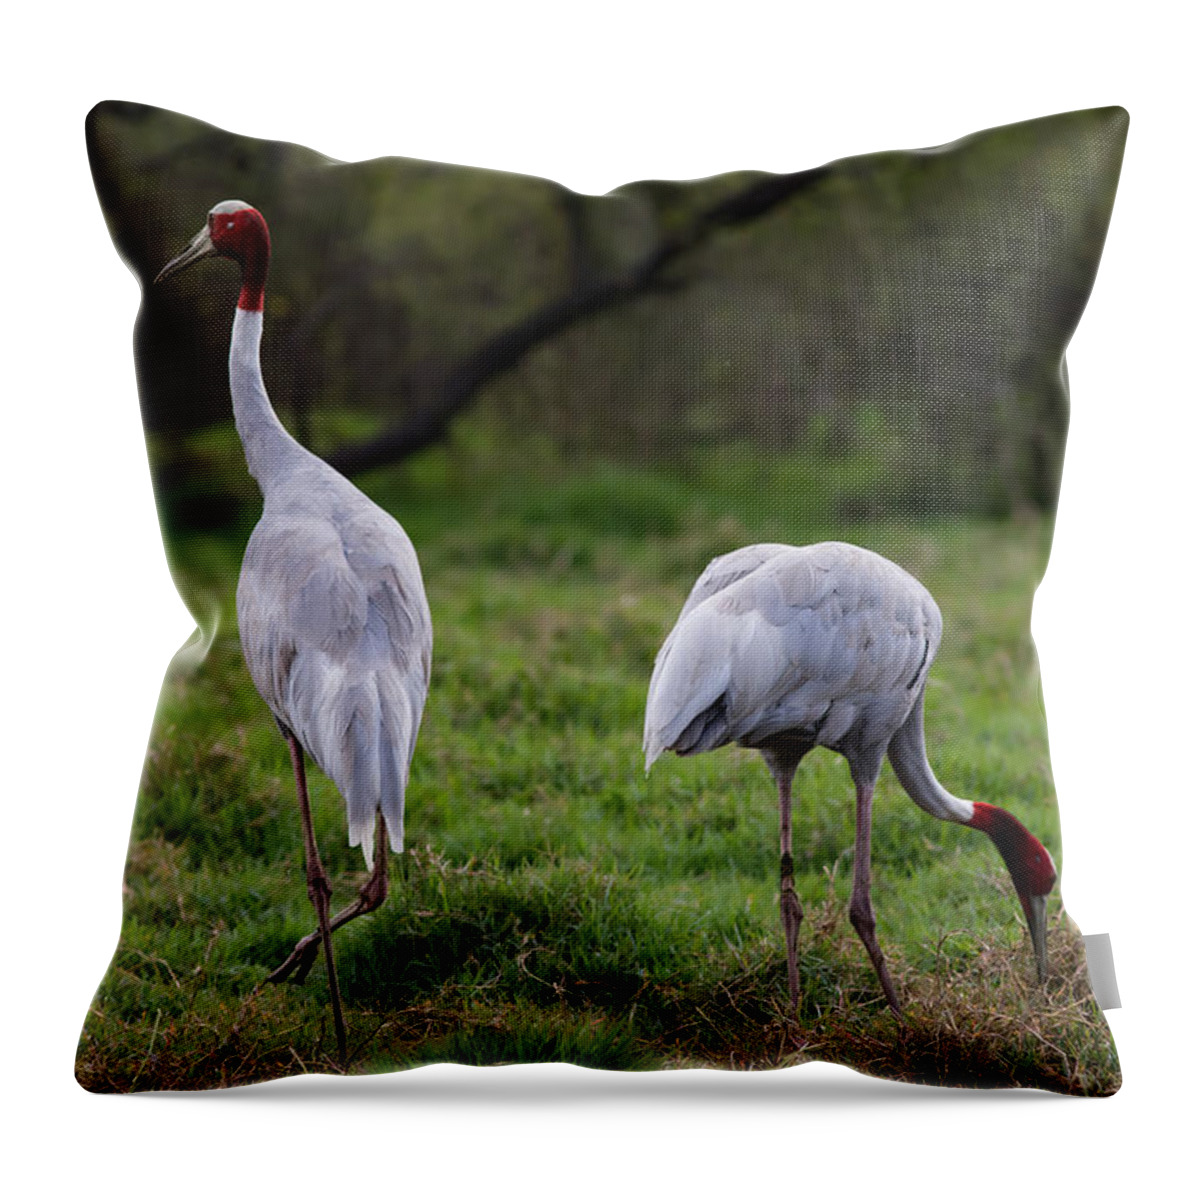 Pair_for_life Throw Pillow featuring the photograph Sarus Crane - Pair for Life by Ramabhadran Thirupattur